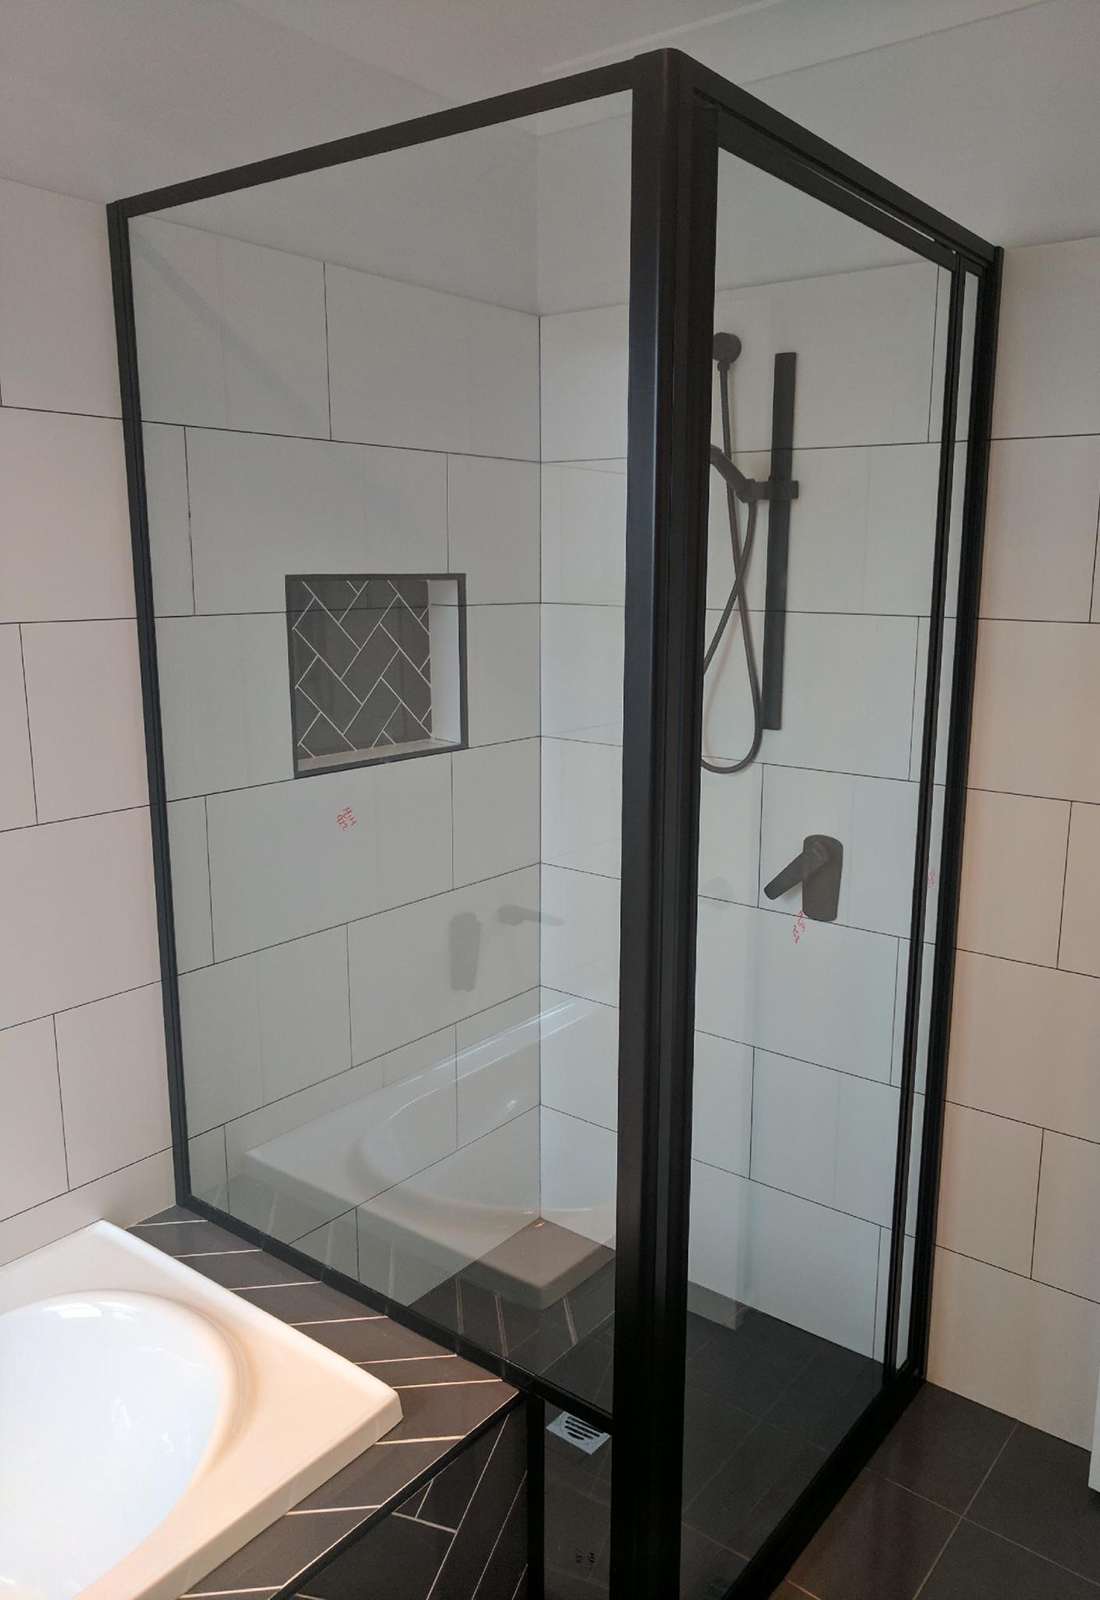 Black Framing in Showers: a Trend That’s Here to Stay